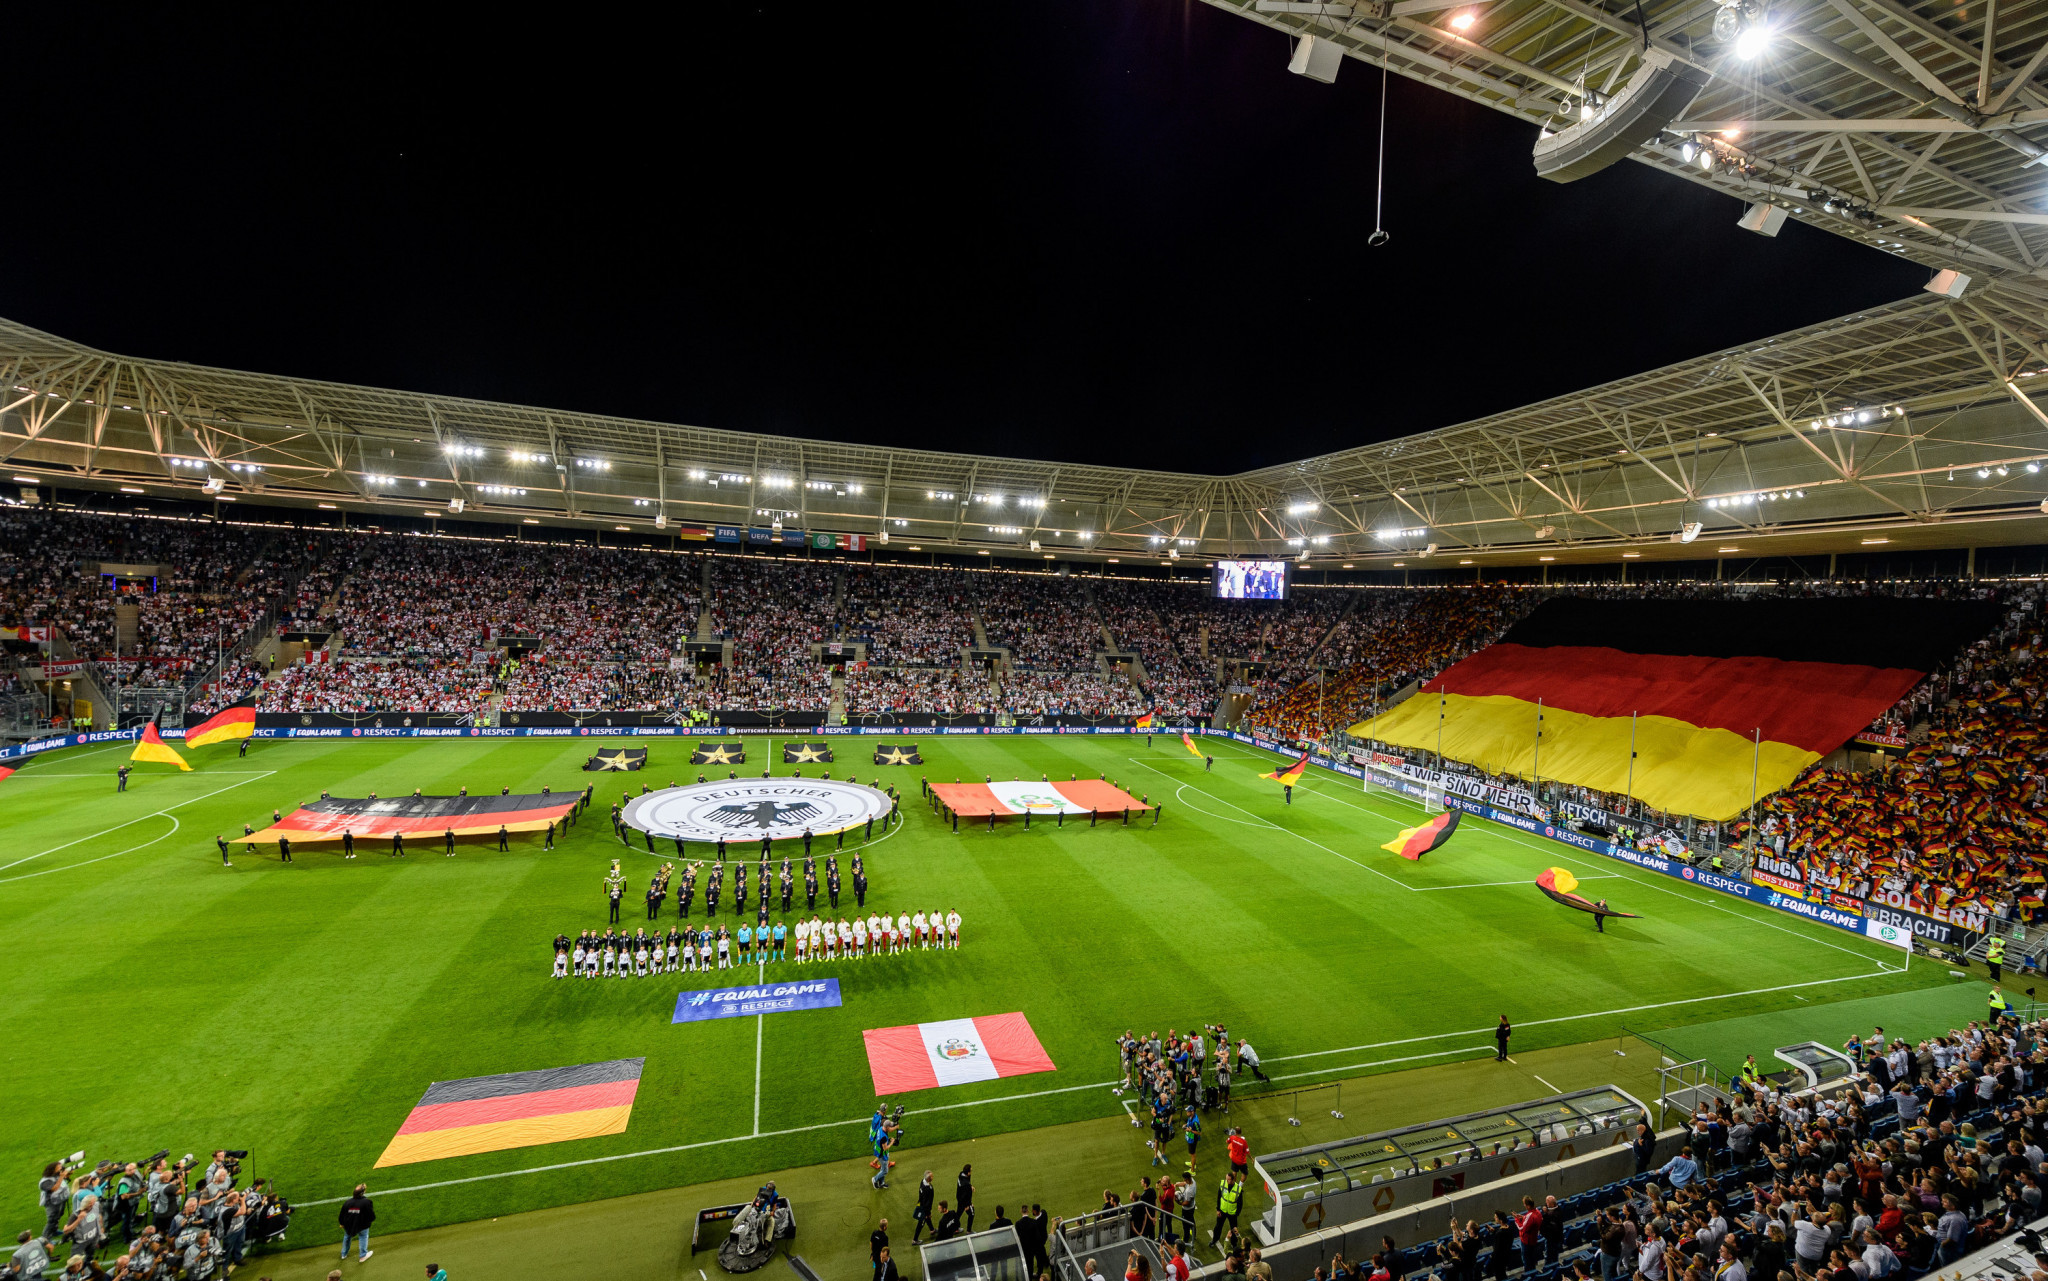 DFB dismiss claims Germany friendly moved to avoid fan violence in lead-up to Euro 2024 vote